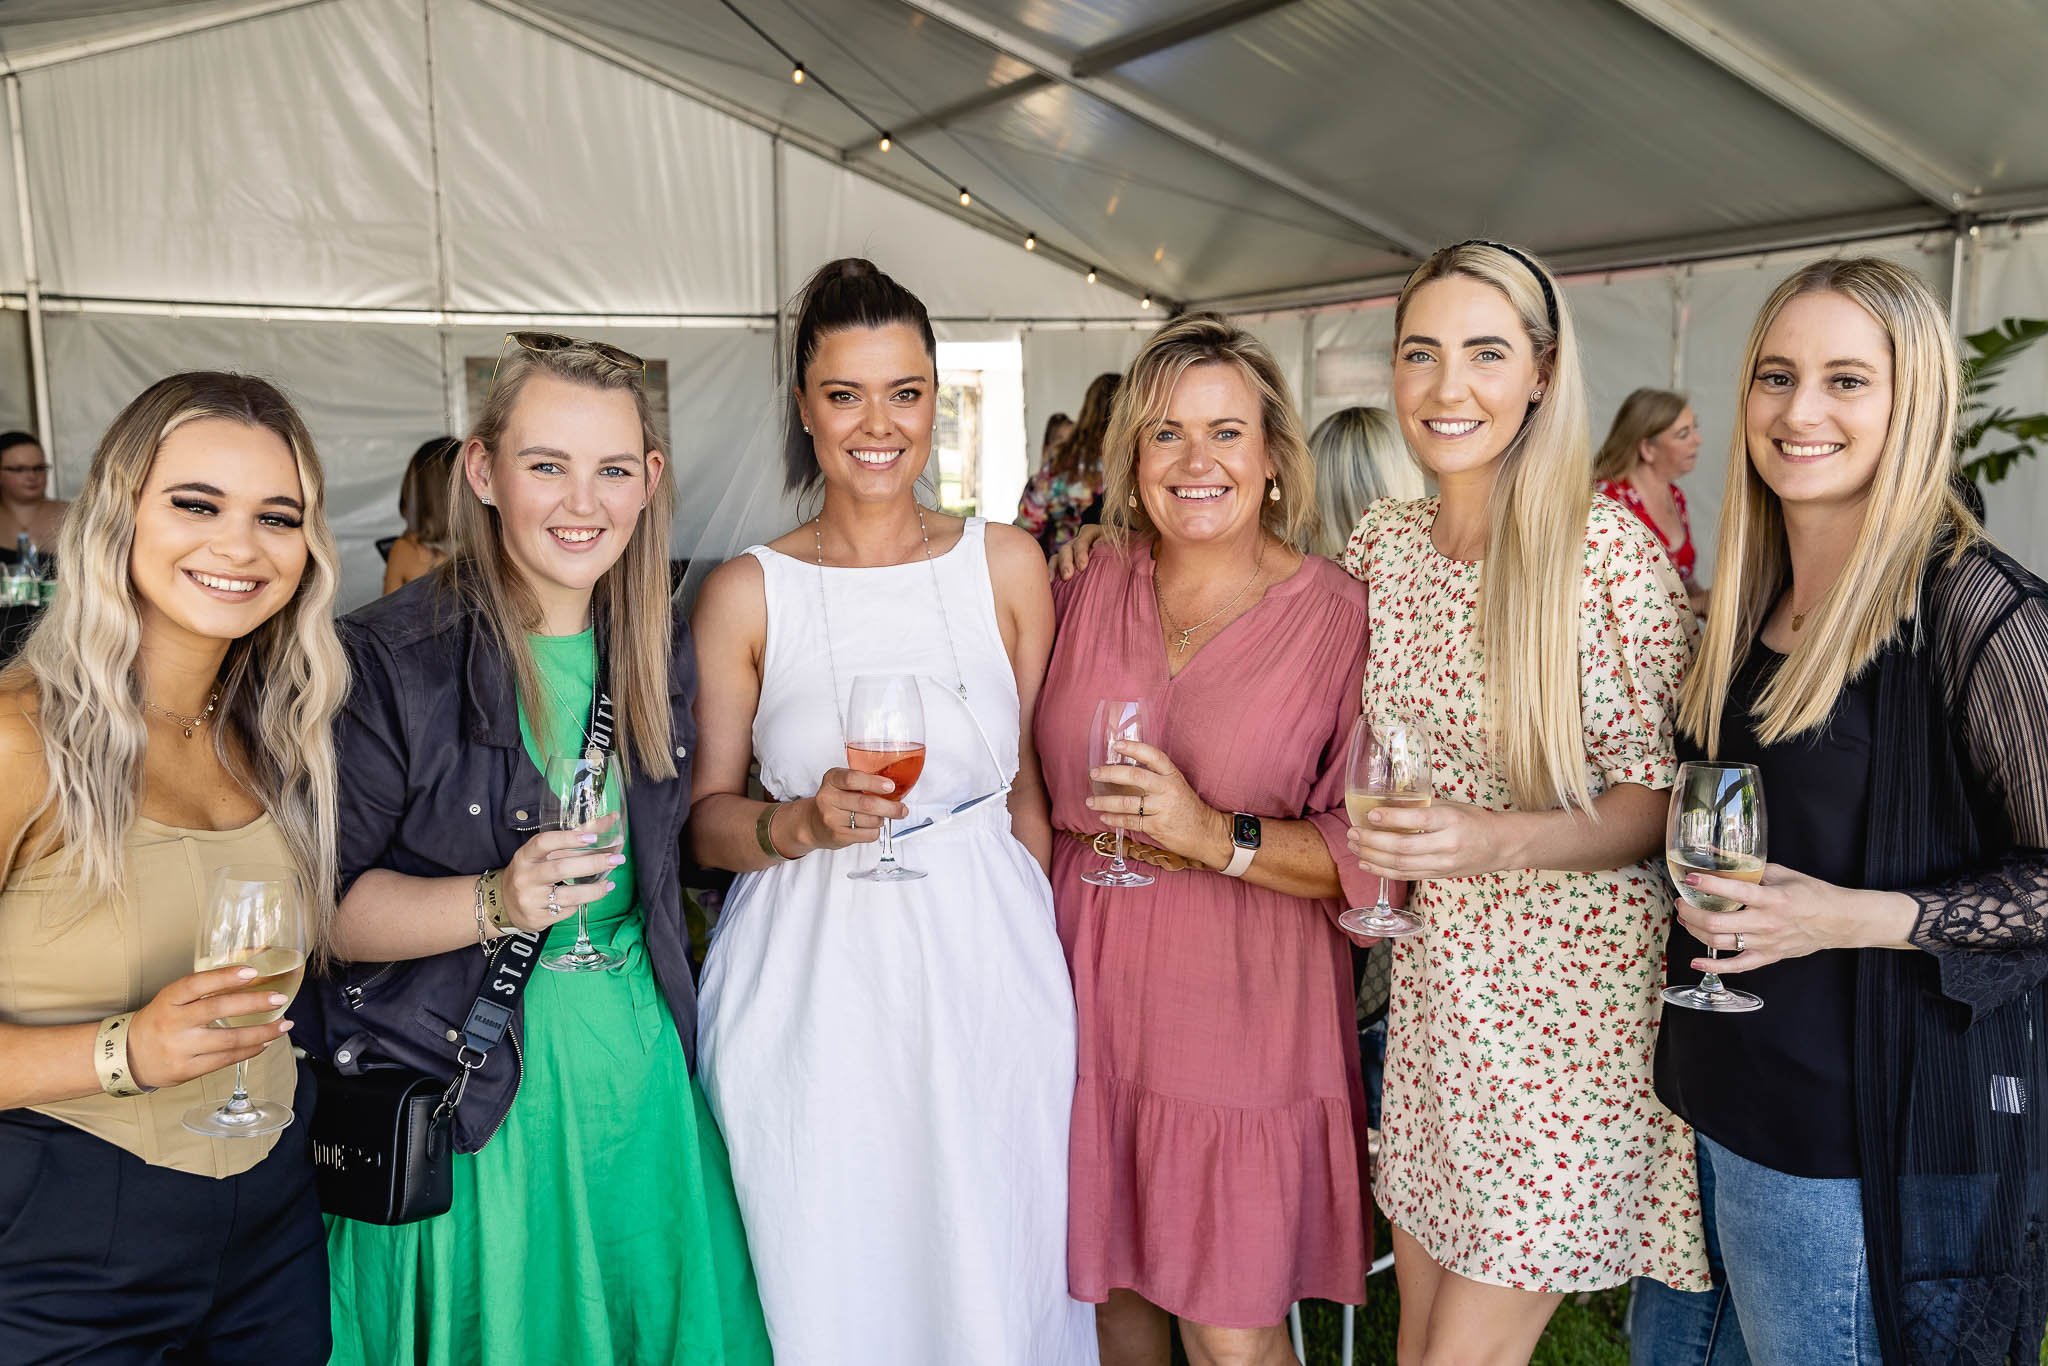 Ammon_Creative-Event_Photography-CMS_Events-UnWined_Subiaco-Image_07.jpg